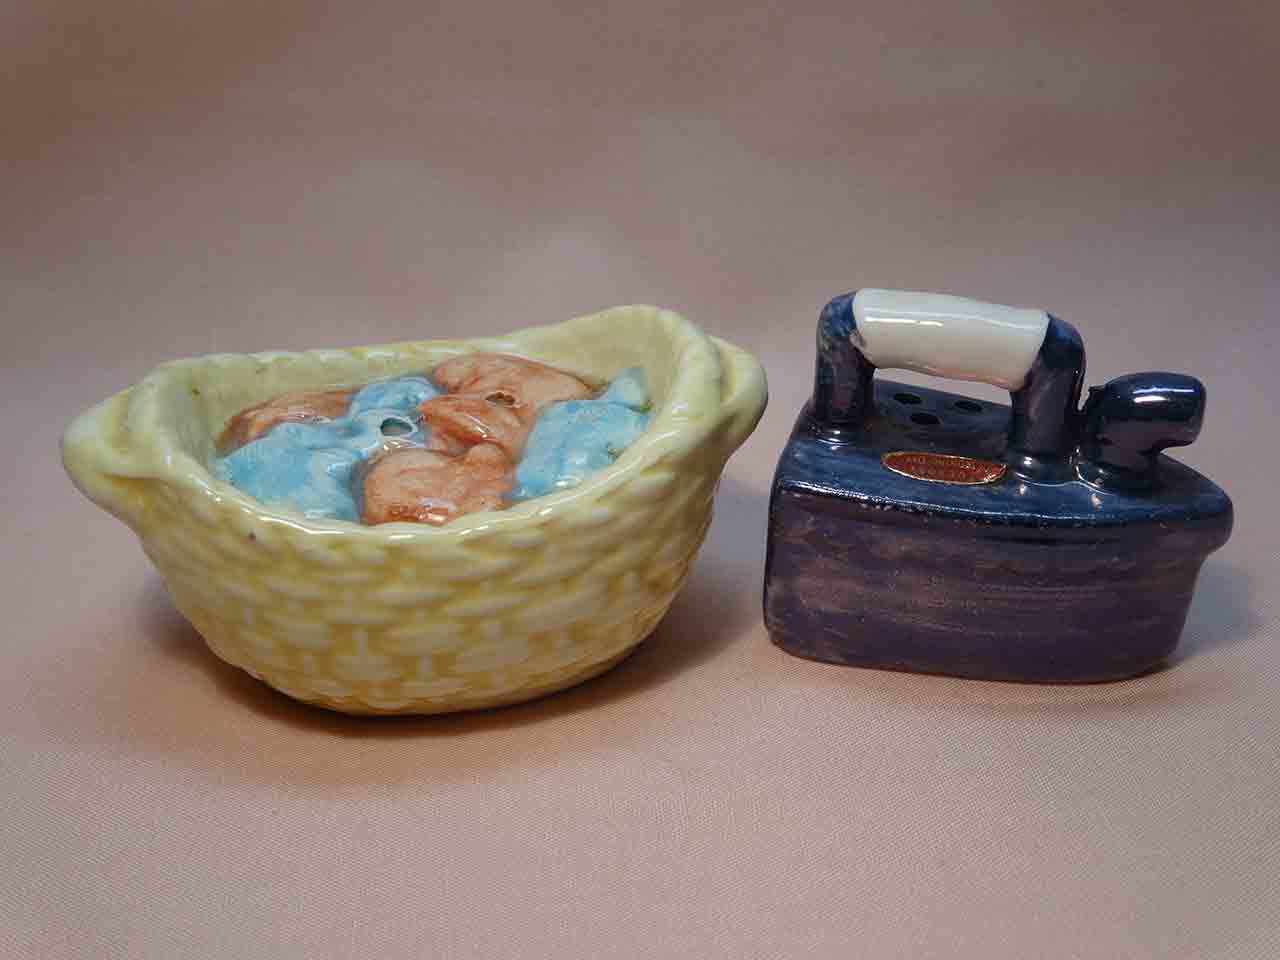 Enesco Seven Days of the Week salt and pepper shakers series - Tuesday Ironing day - flat iron and clothes basket